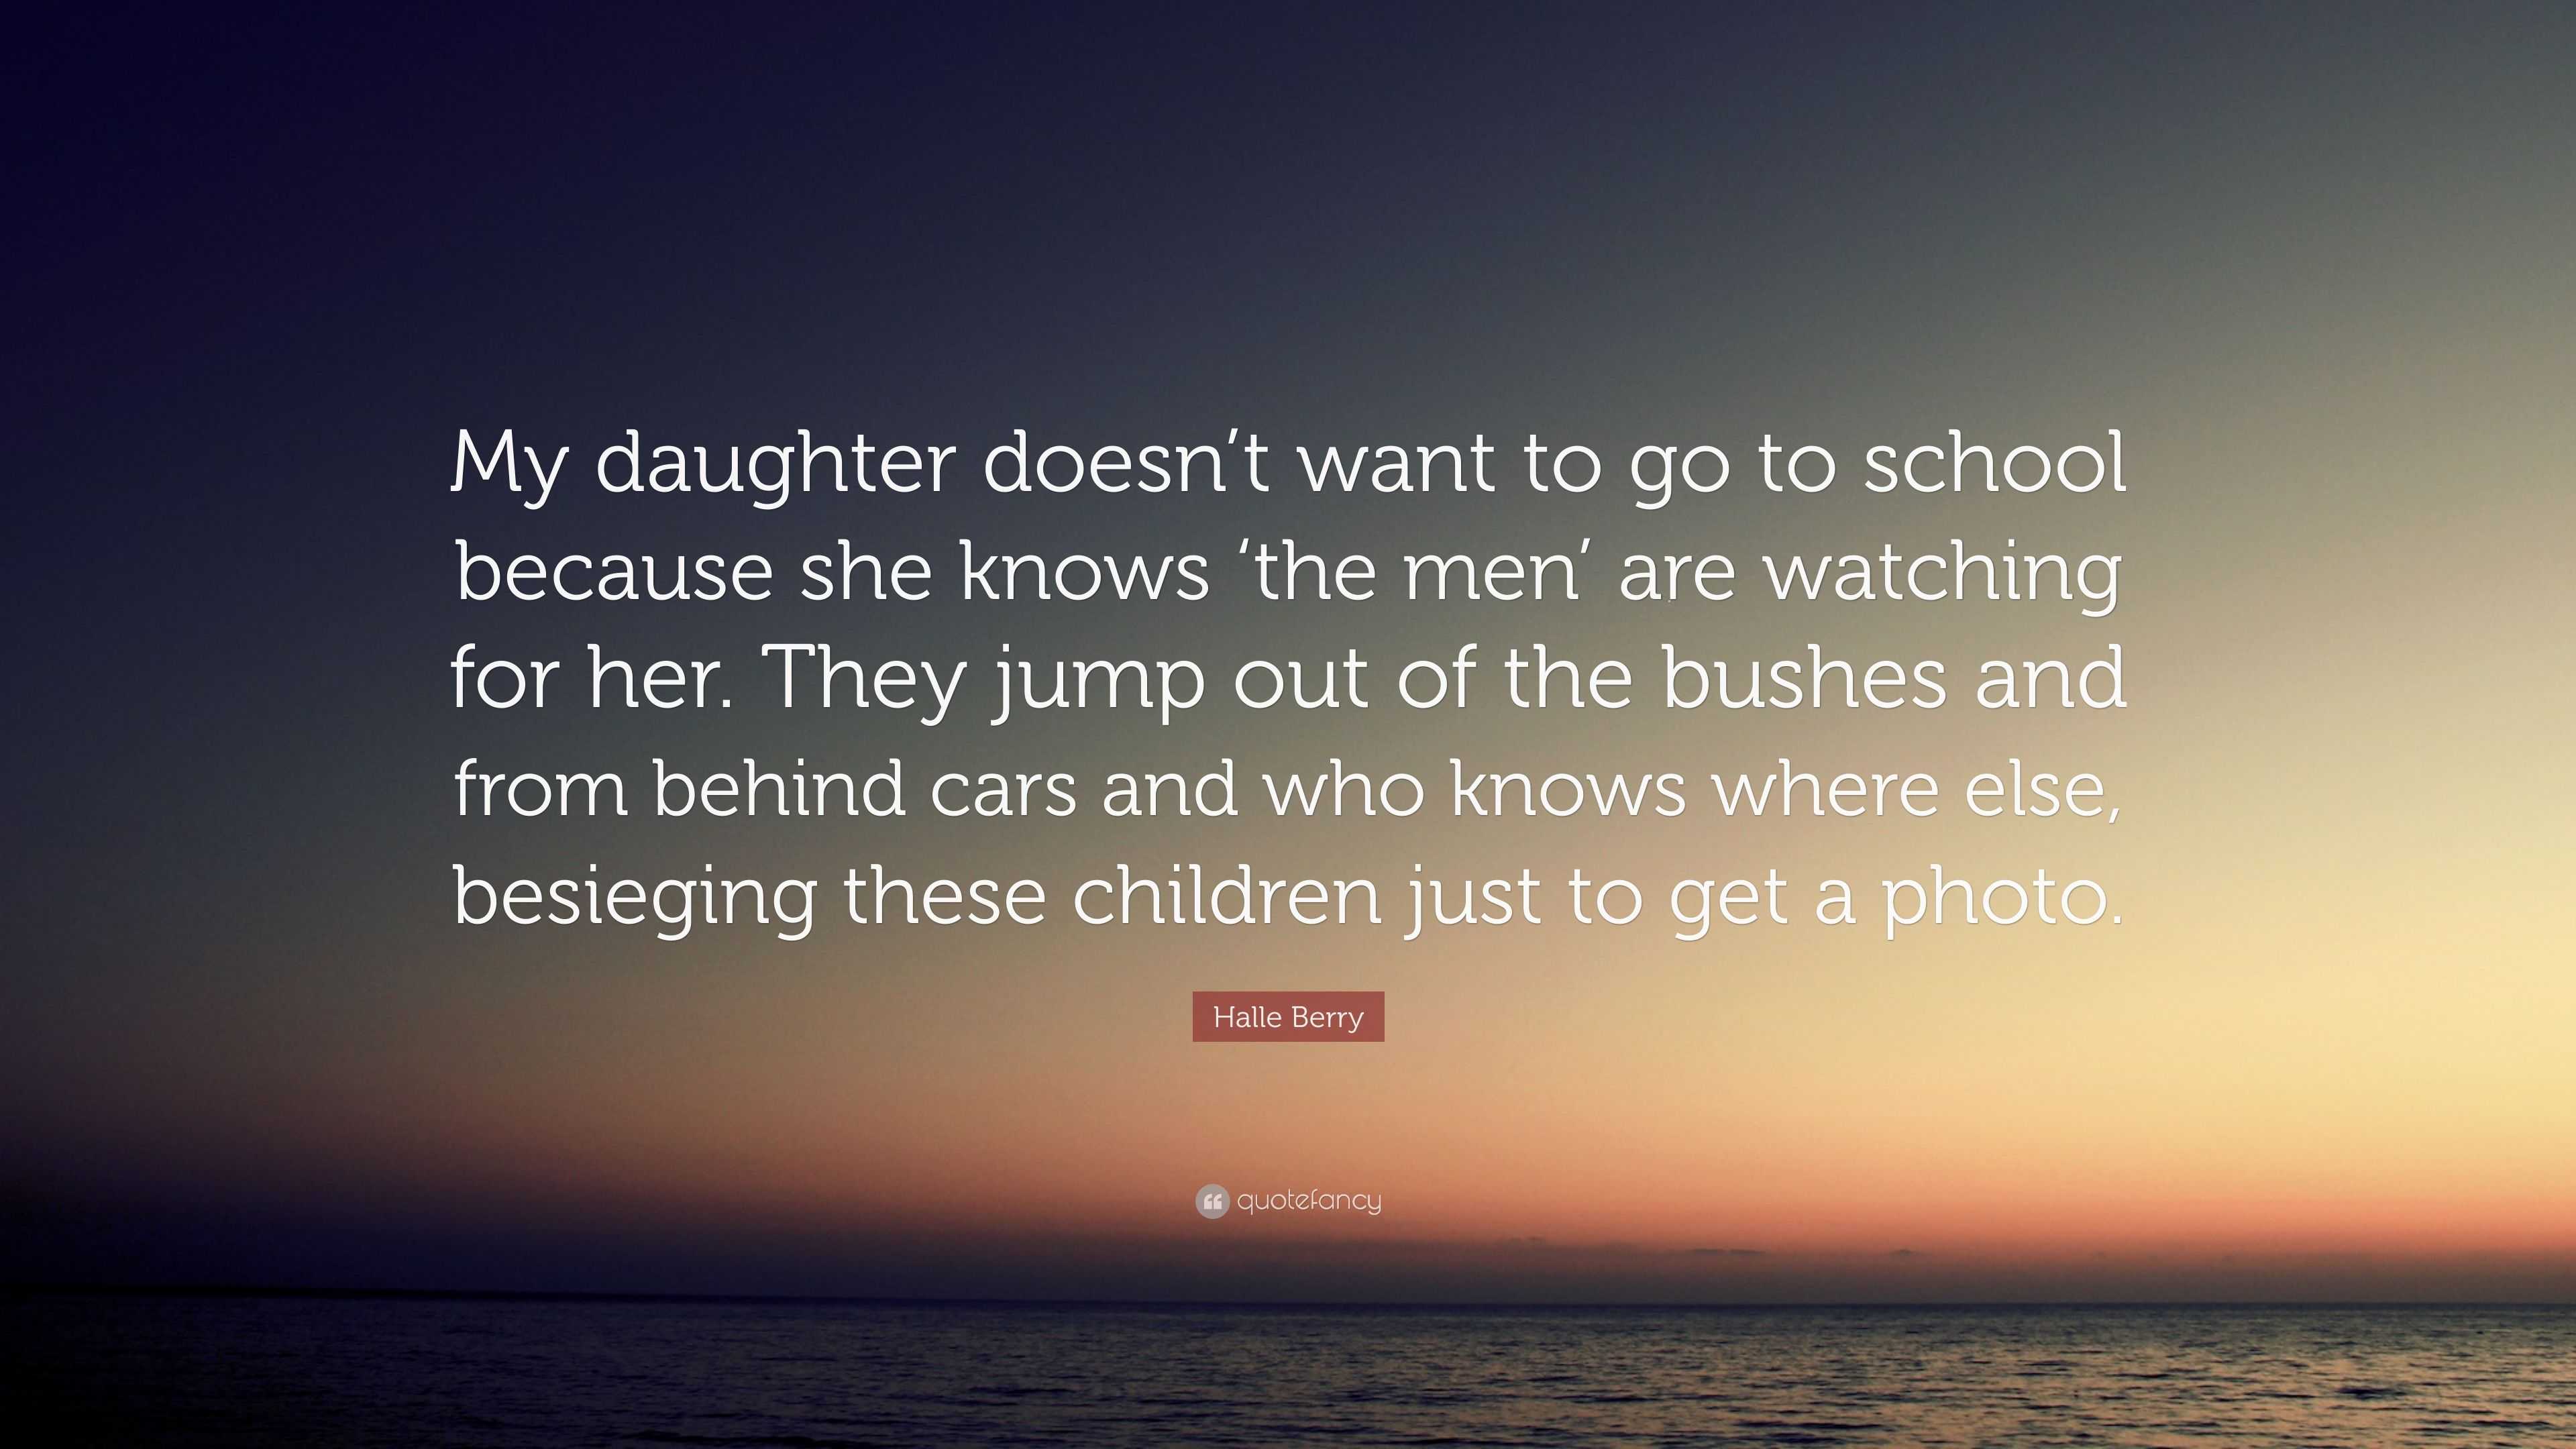 Halle Berry Quote “My daughter doesn’t want to go to school because